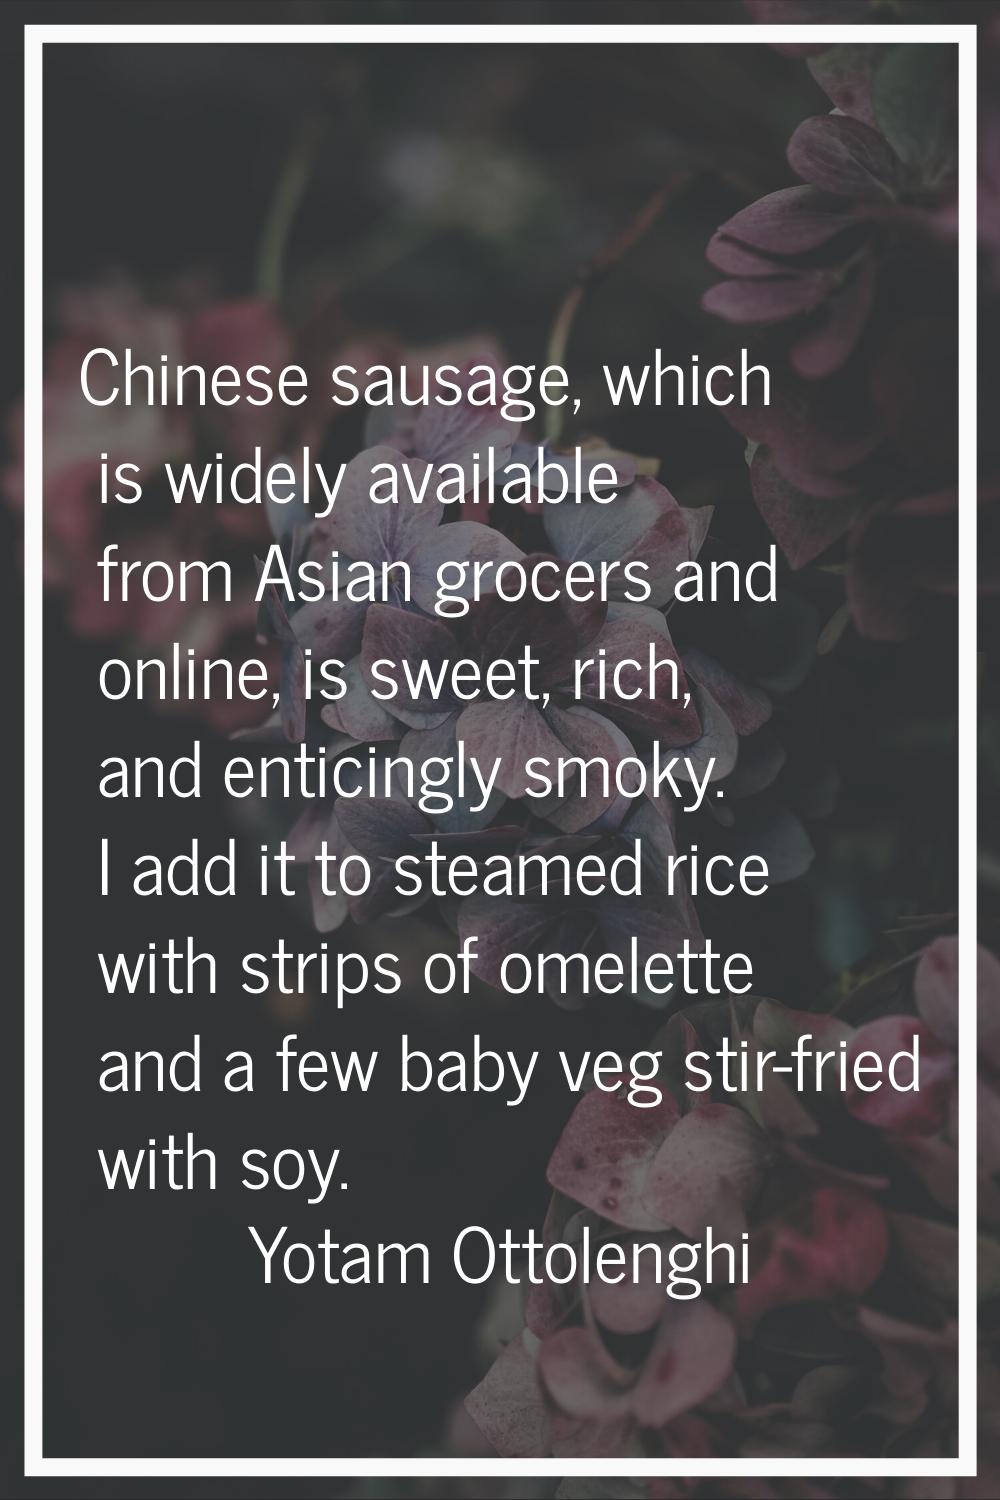 Chinese sausage, which is widely available from Asian grocers and online, is sweet, rich, and entic